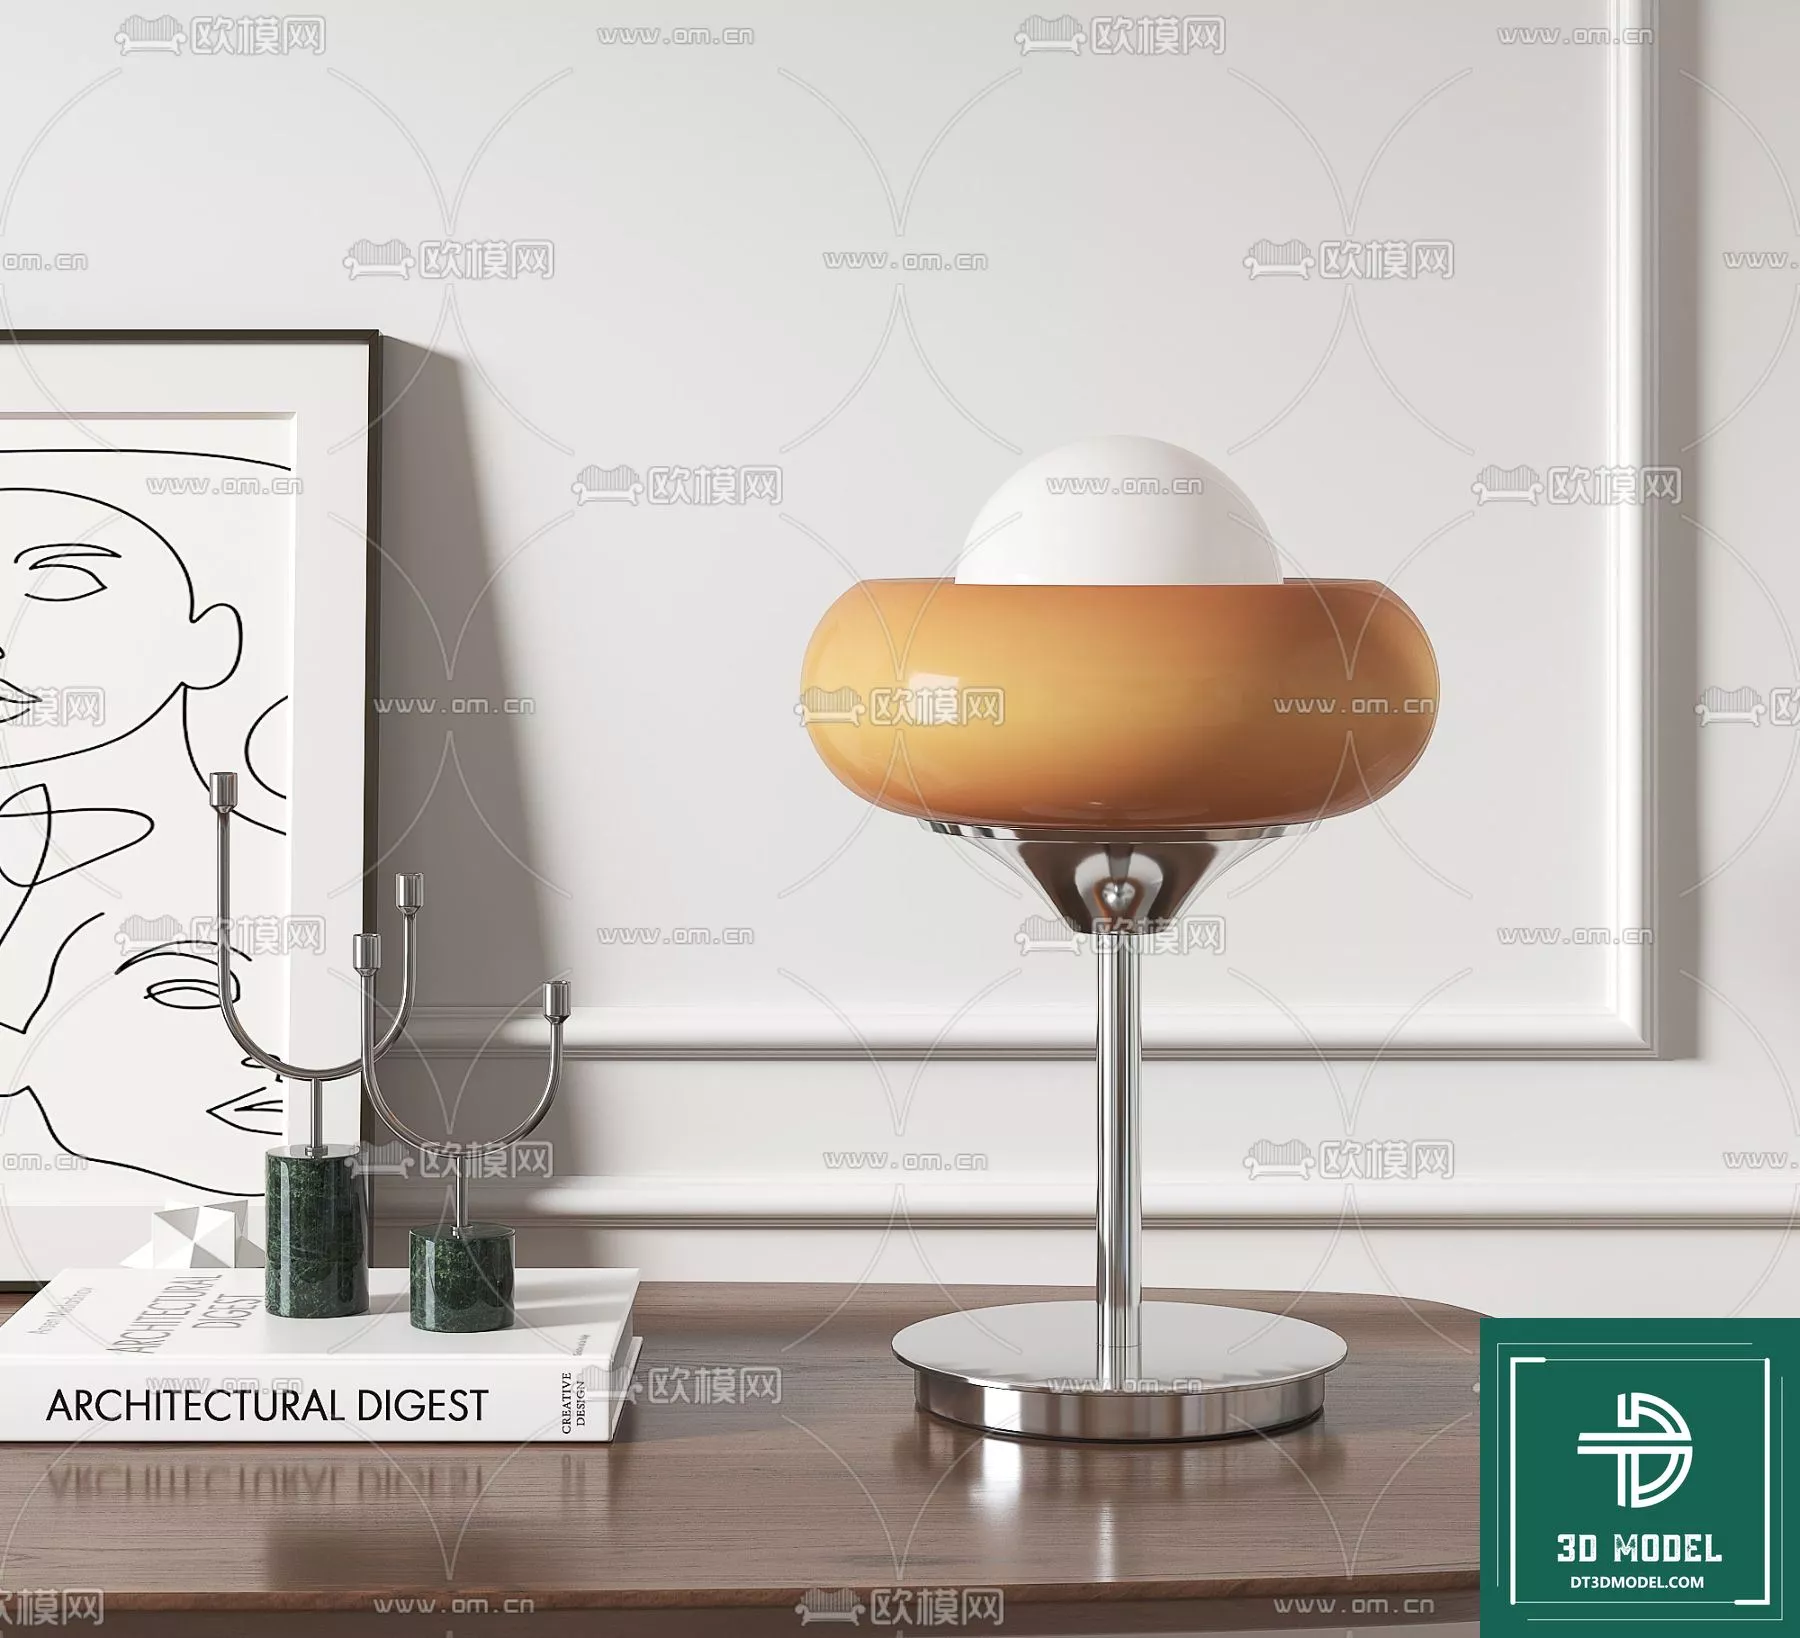 MODERN TABLE LAMP - SKETCHUP 3D MODEL - VRAY OR ENSCAPE - ID14505